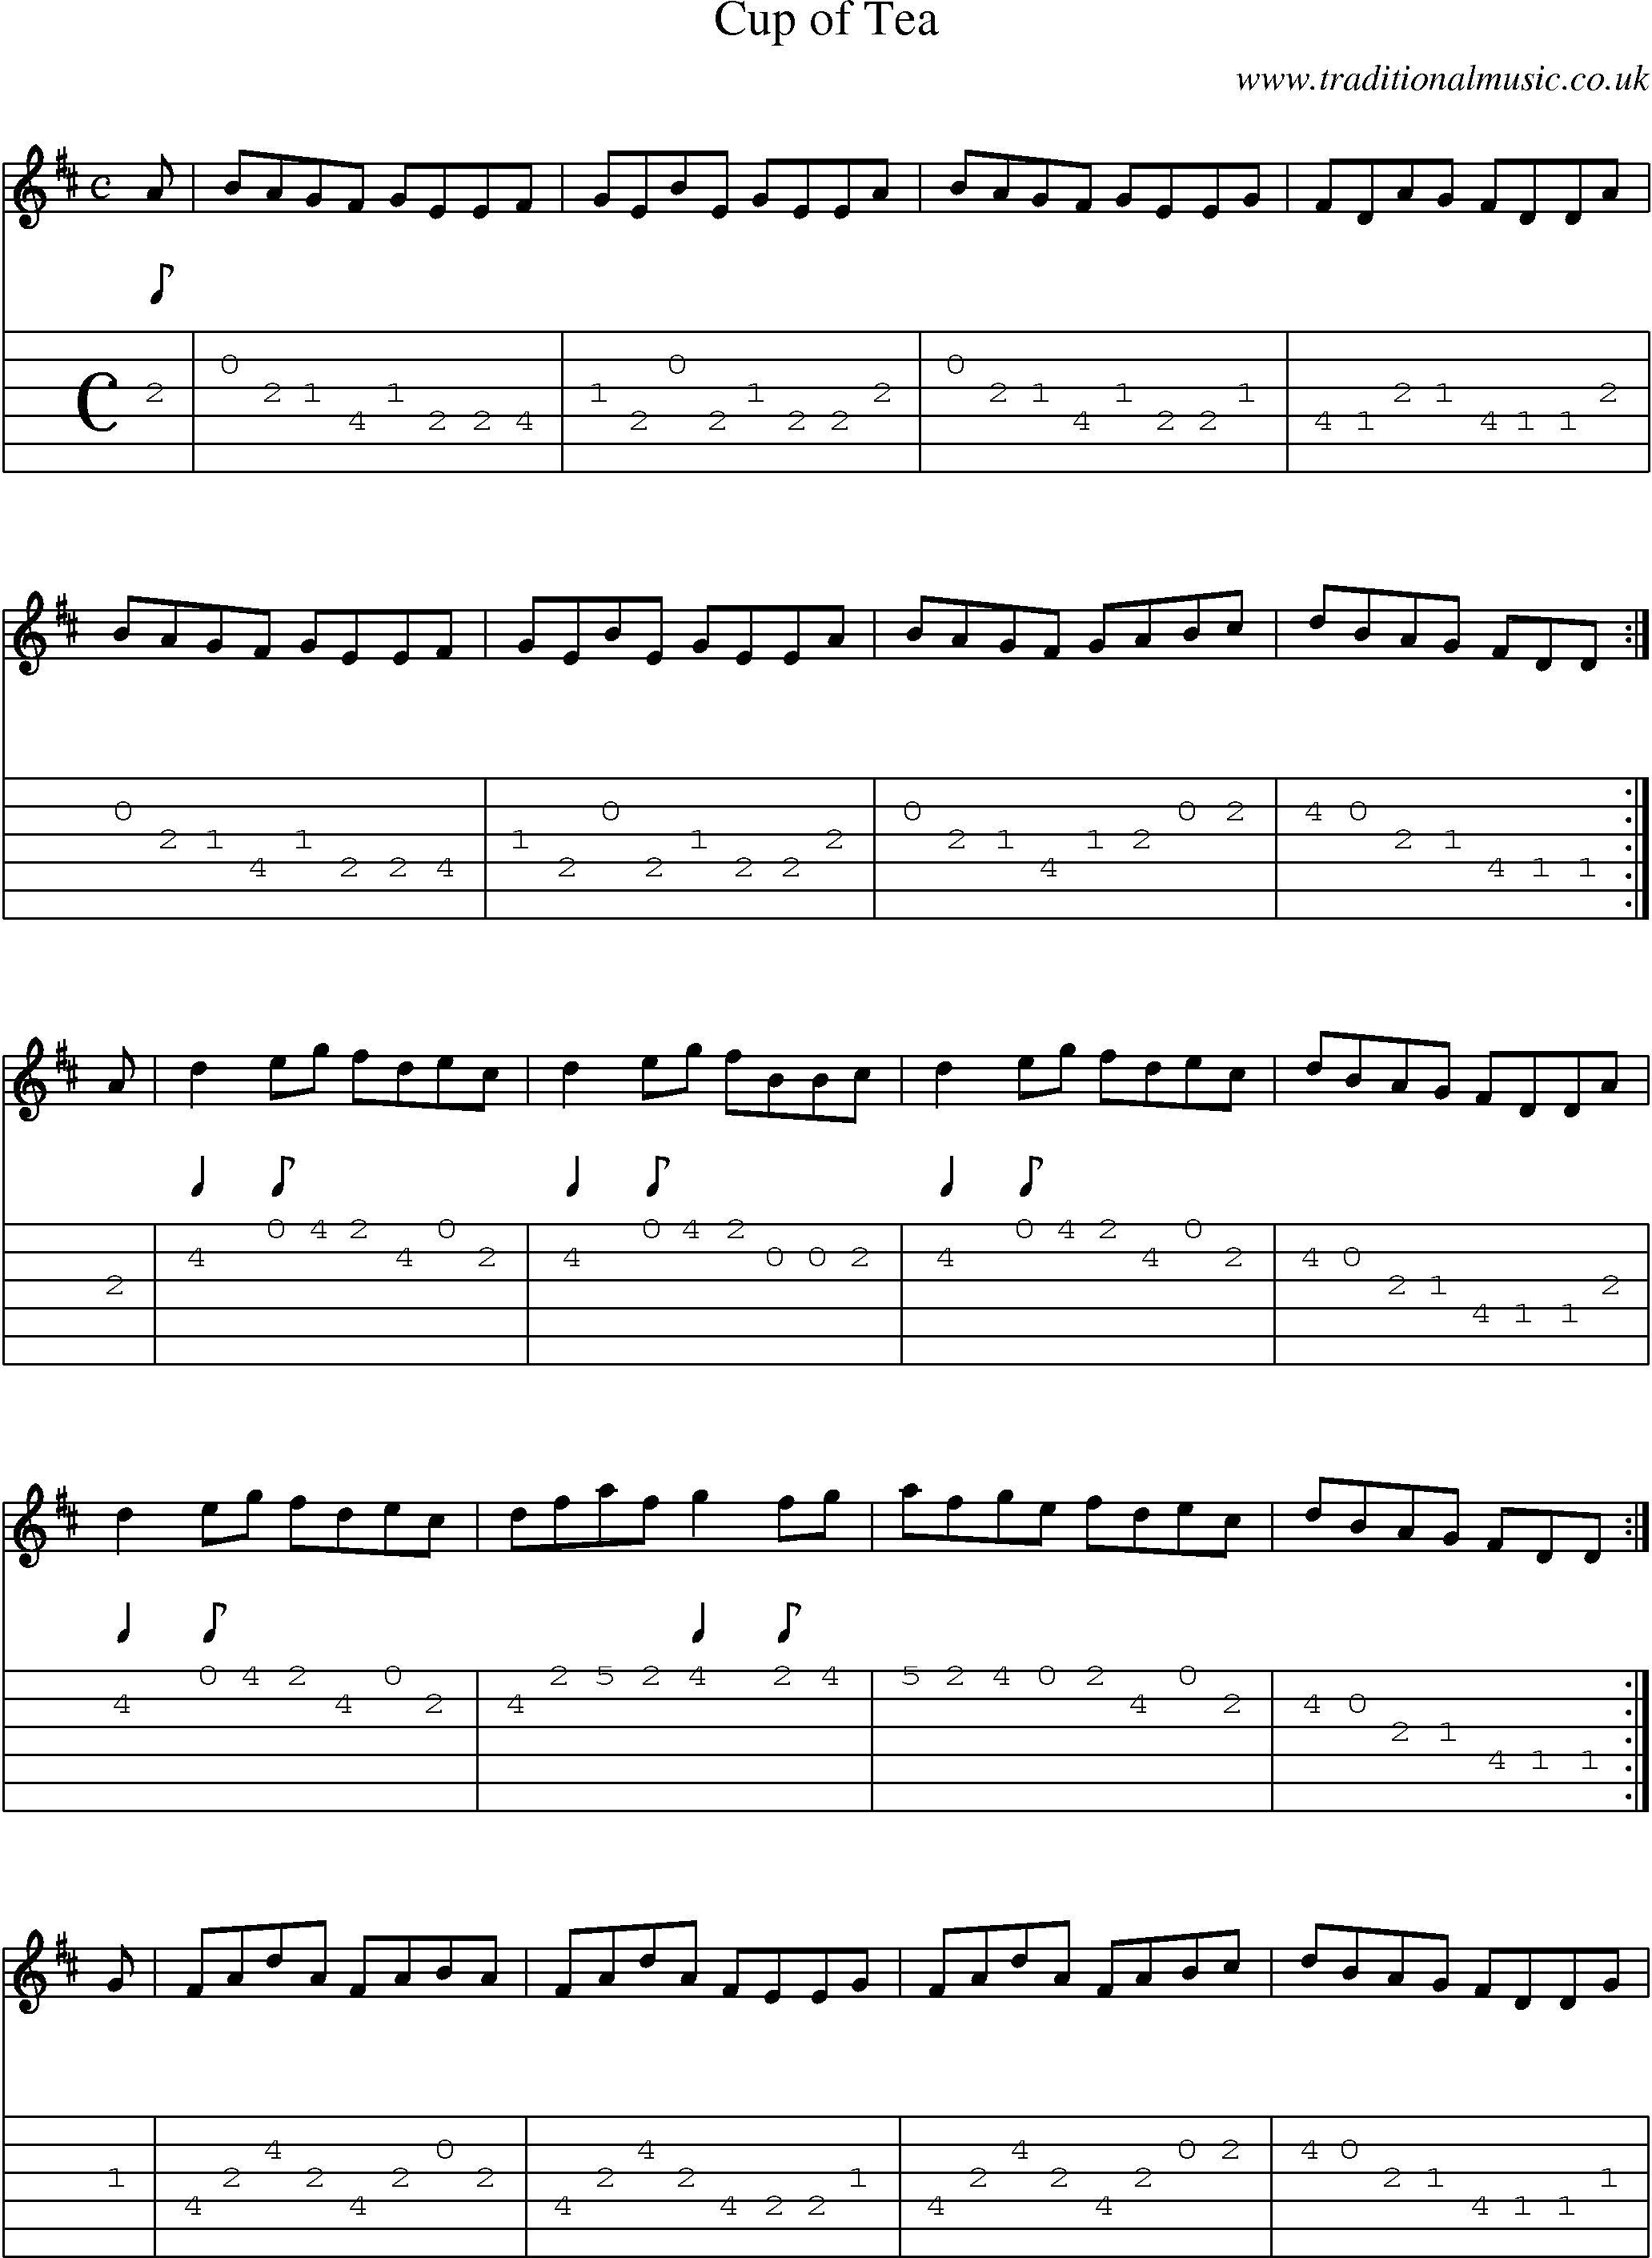 Music Score and Guitar Tabs for Cup Of Tea